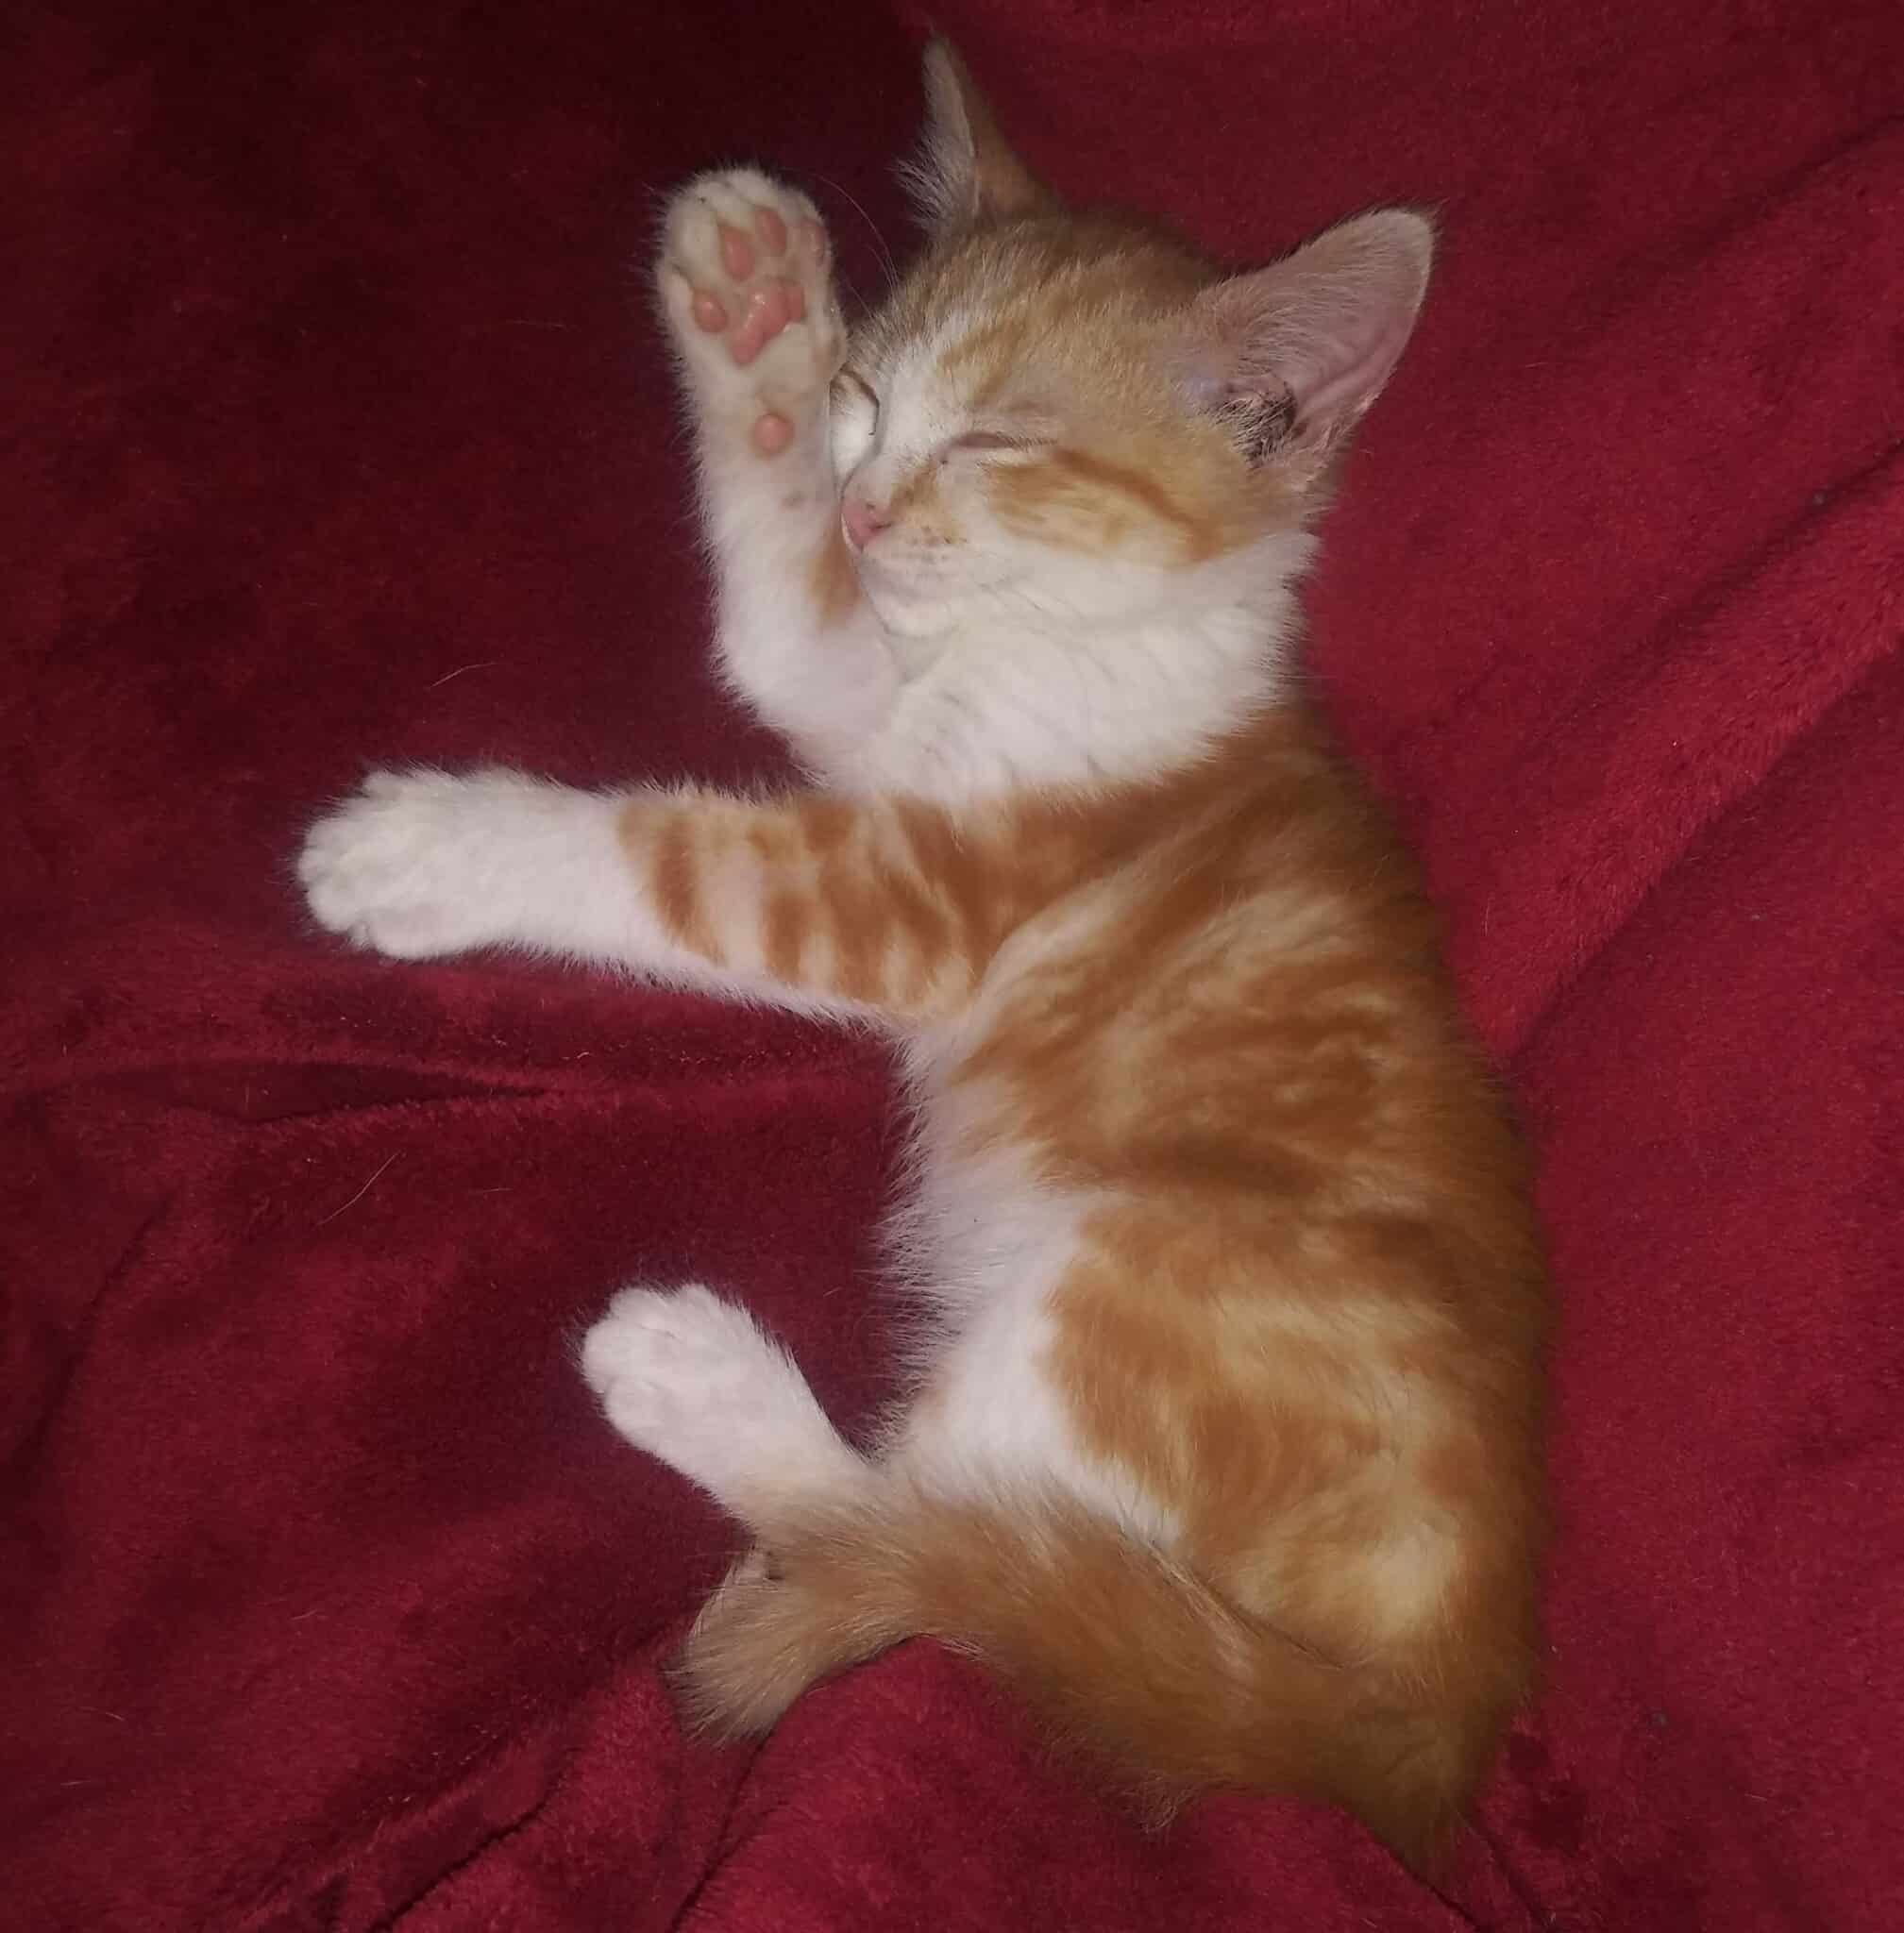 Orange and white kitten taking a nap on a red blanket